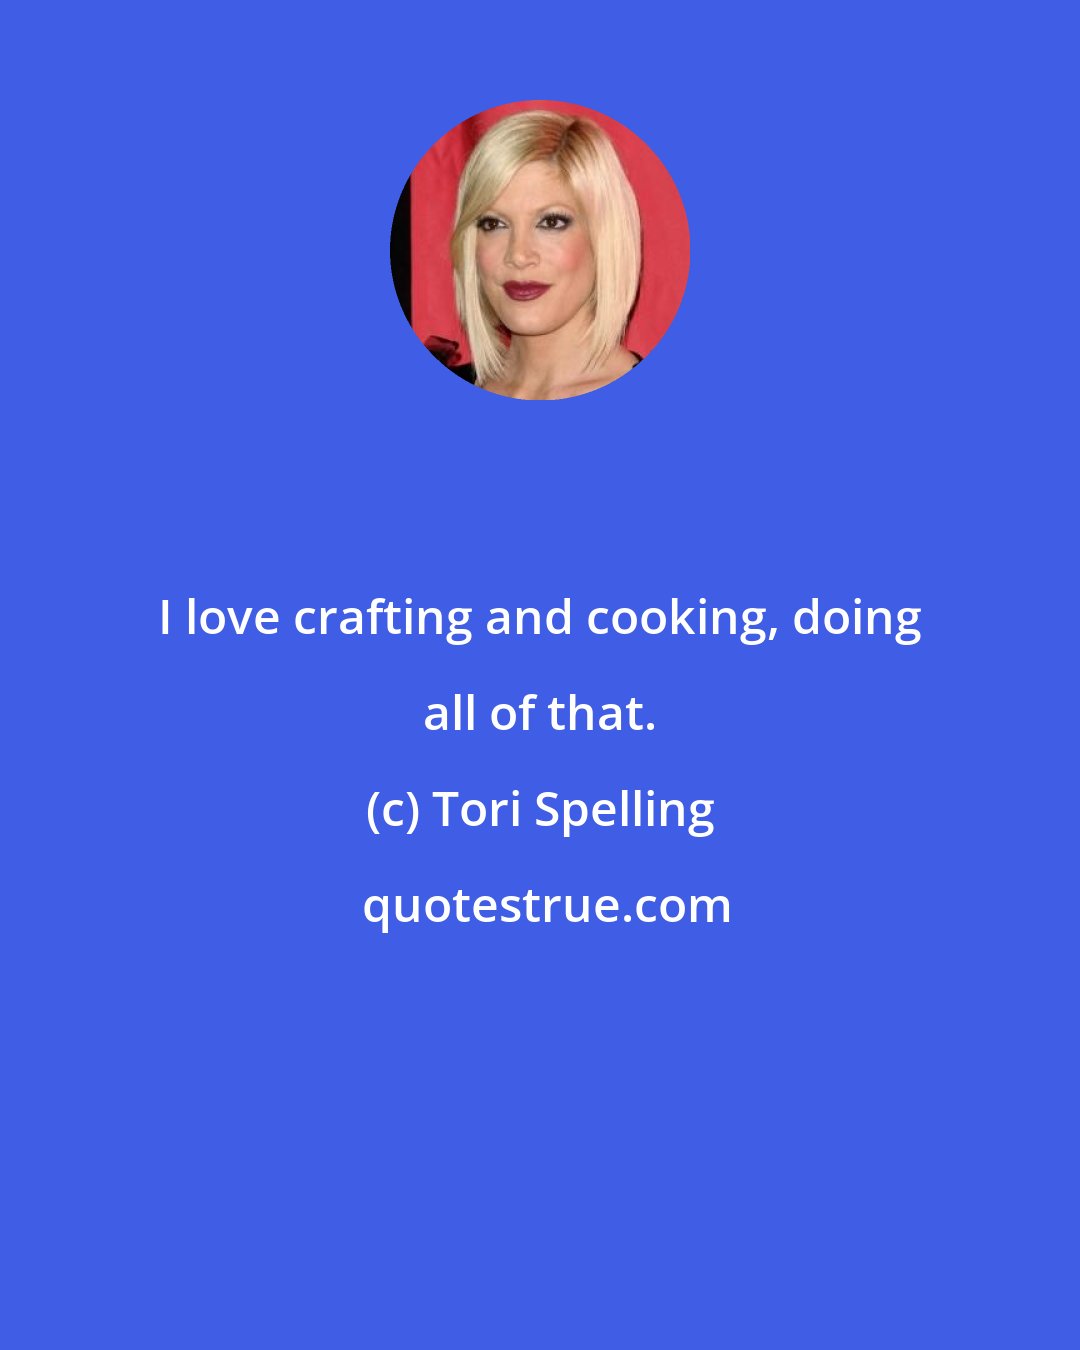 Tori Spelling: I love crafting and cooking, doing all of that.